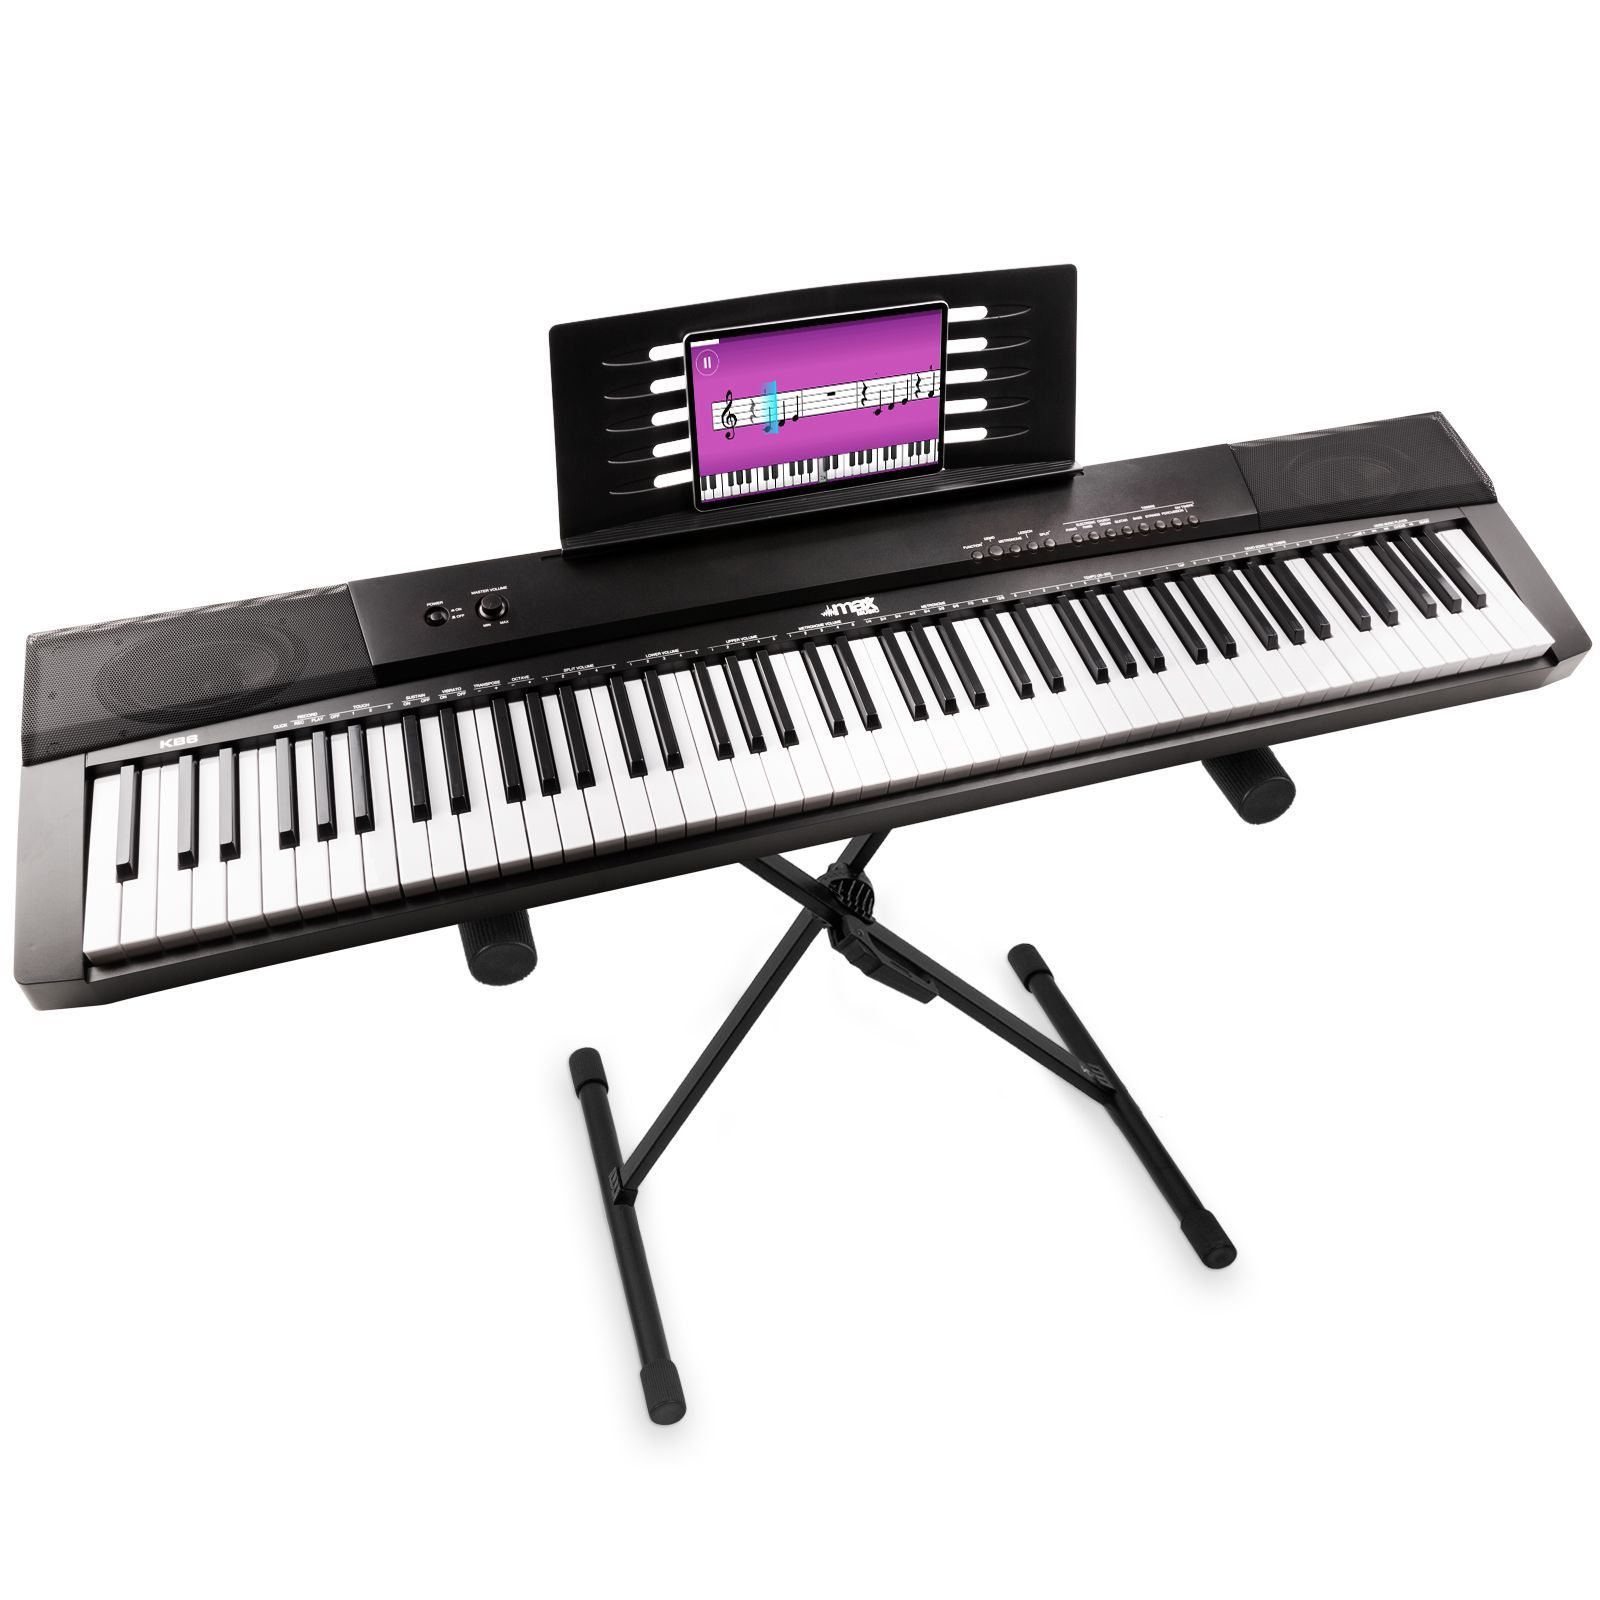 Professionnel Support Pour Clavier Piano Synthétiseur Stand Pied Double  Barres X